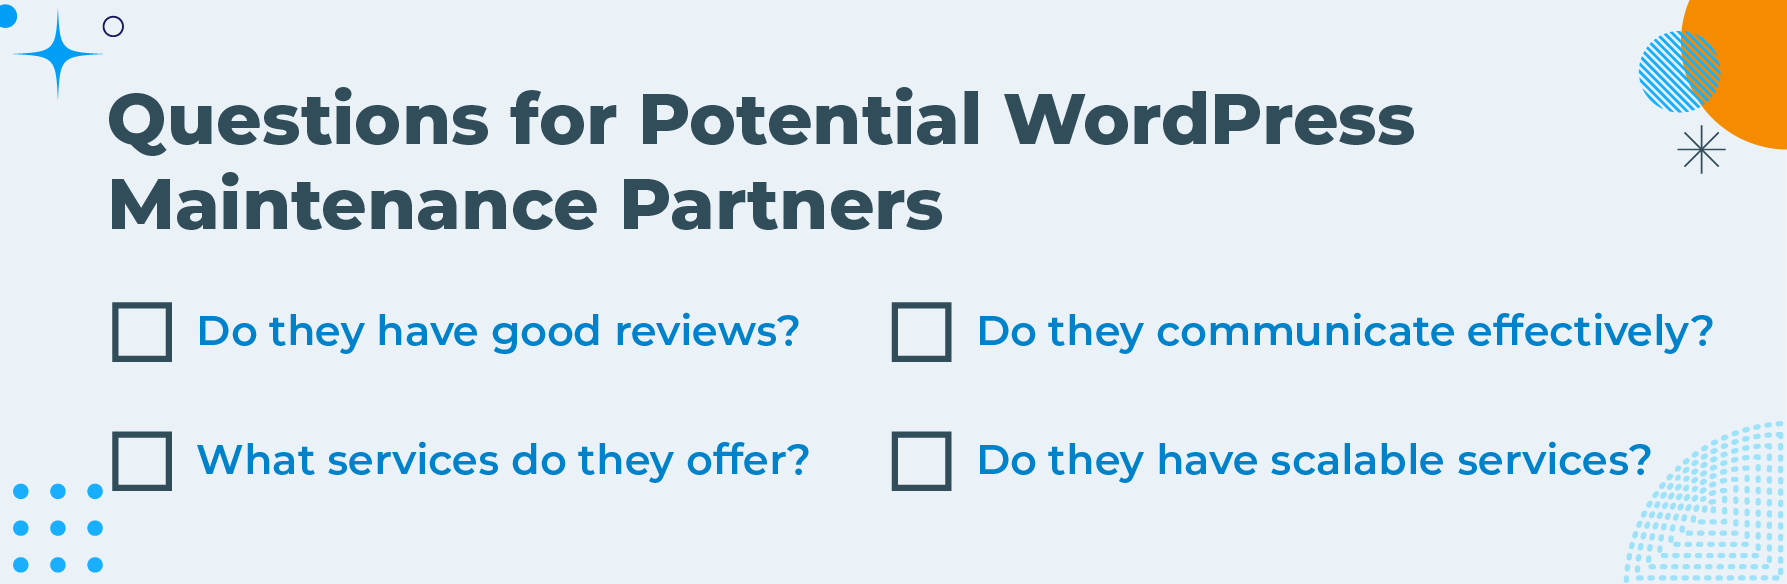 Questions for Potential WordPress Maintenance Partners